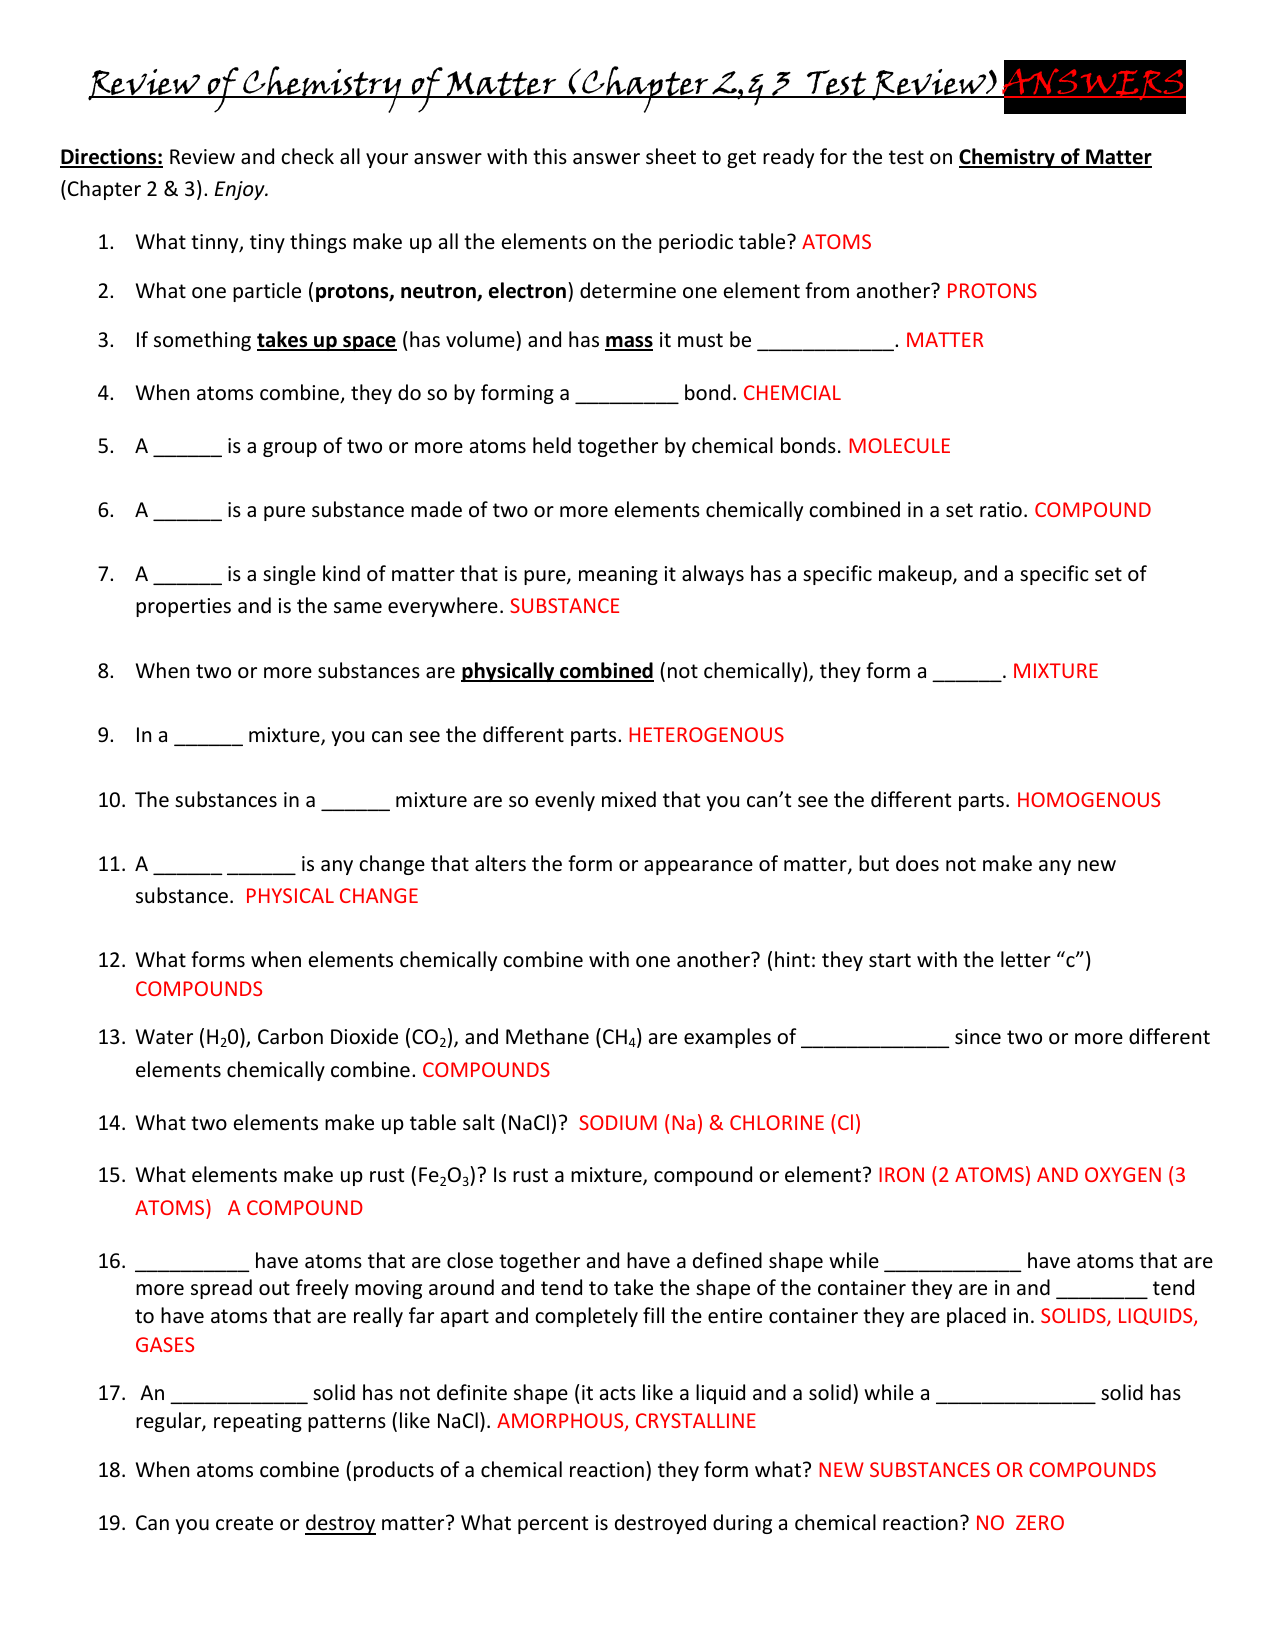  Changes And Matter Worksheet Answers Free Download Qstion co